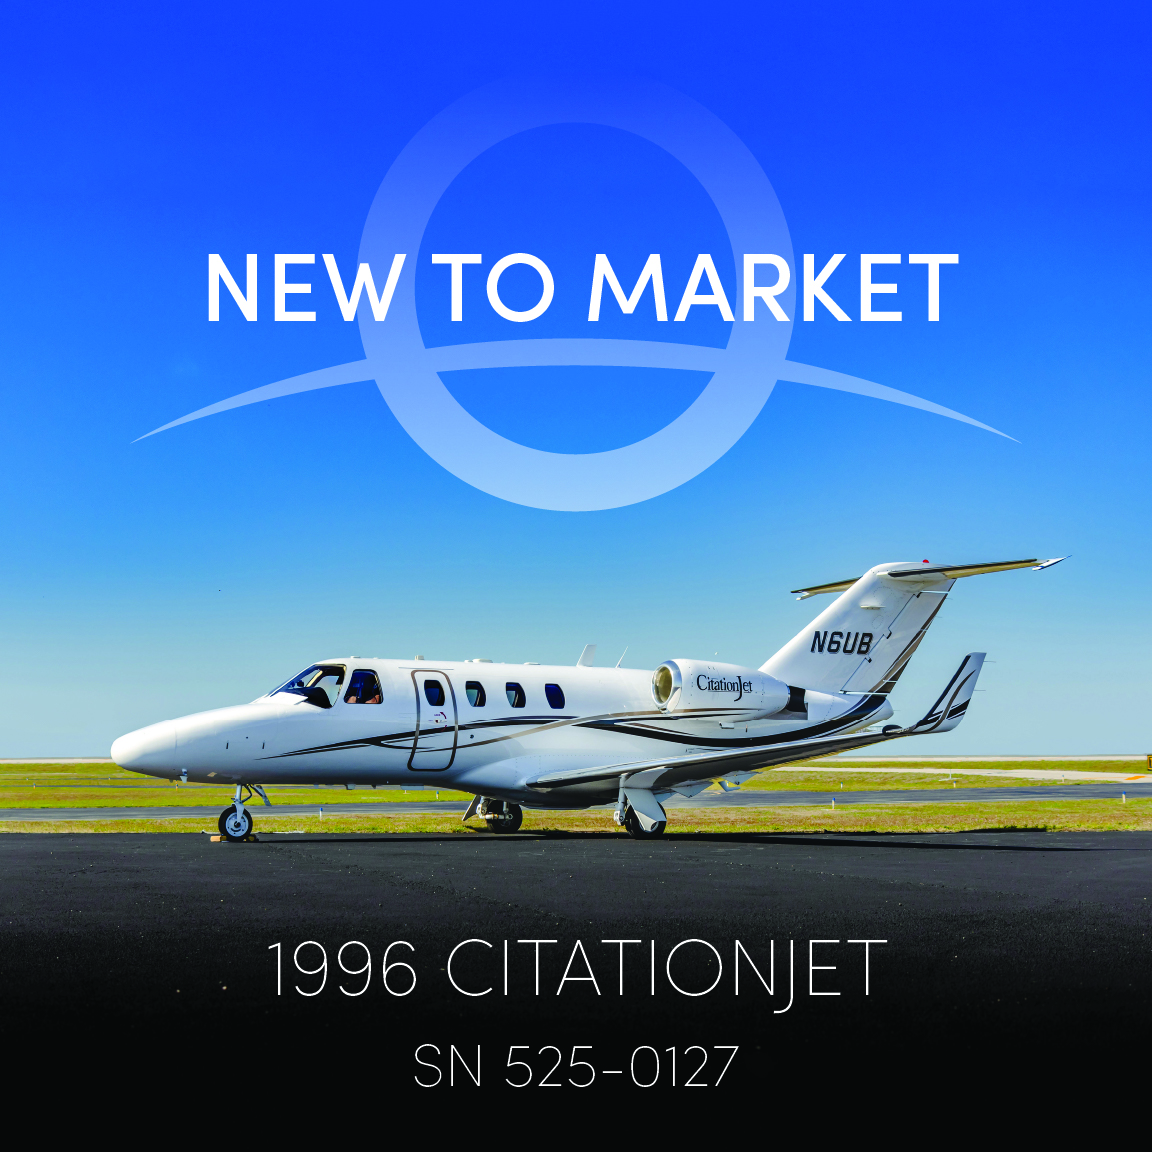 New to Market!

OGARAJETS is pleased to bring this Cessna CitationJet to market!

See our website for more photos and details - zurl.co/YaMD 

#fosteringconfidence #createtime #newtomarket #aircraftsales #bizav #cessna #citationjet